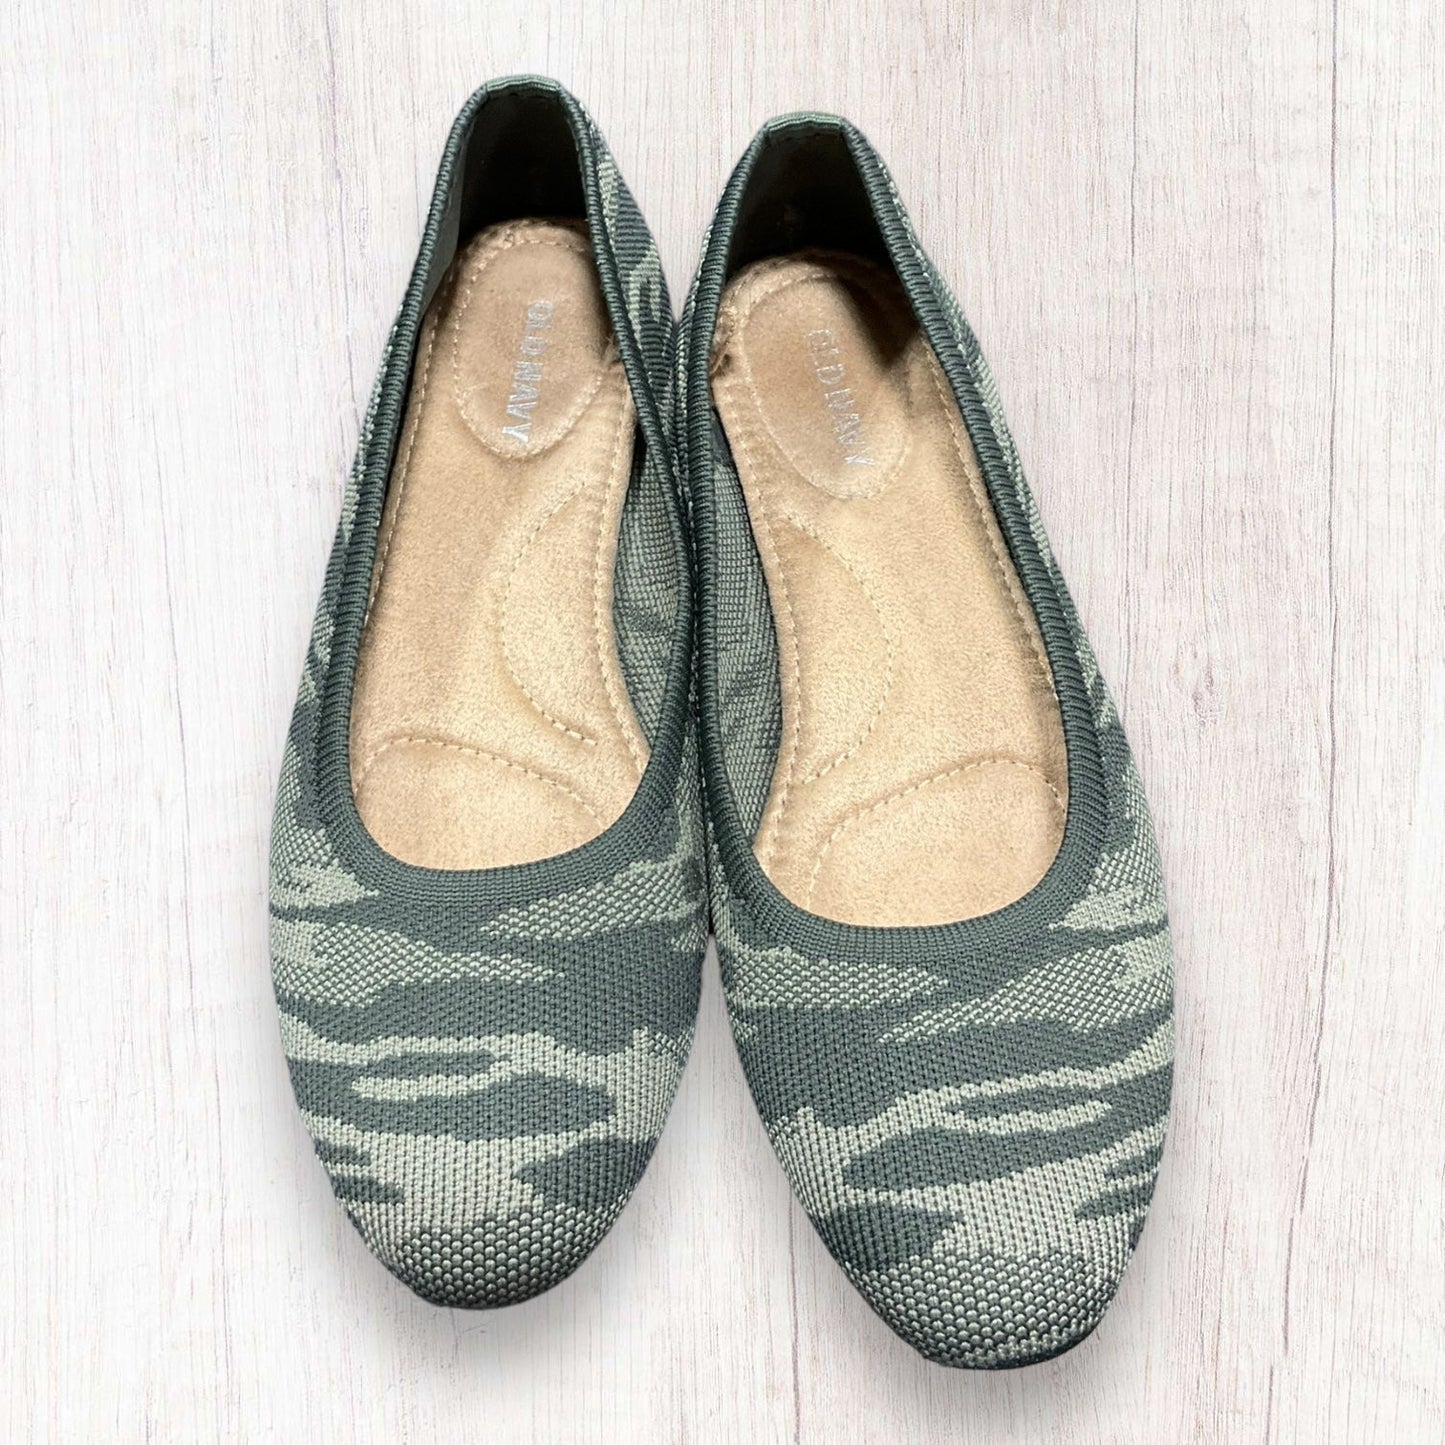 Camouflage Print Shoes Flats Old Navy, Size 6